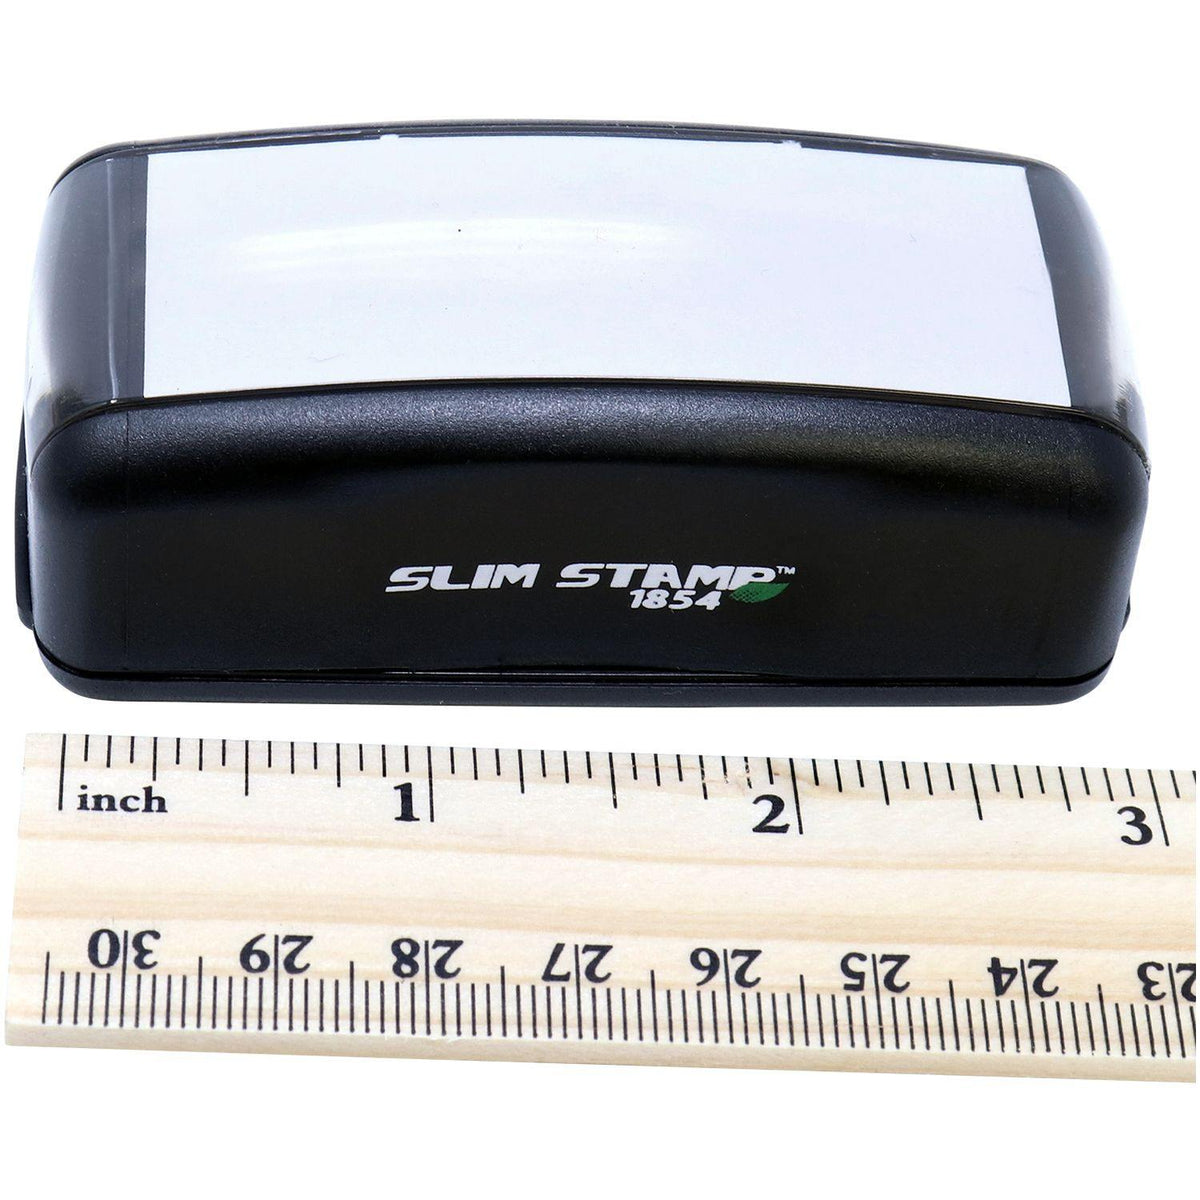 Measurement Large Pre Inked Thank You Stamp with Ruler